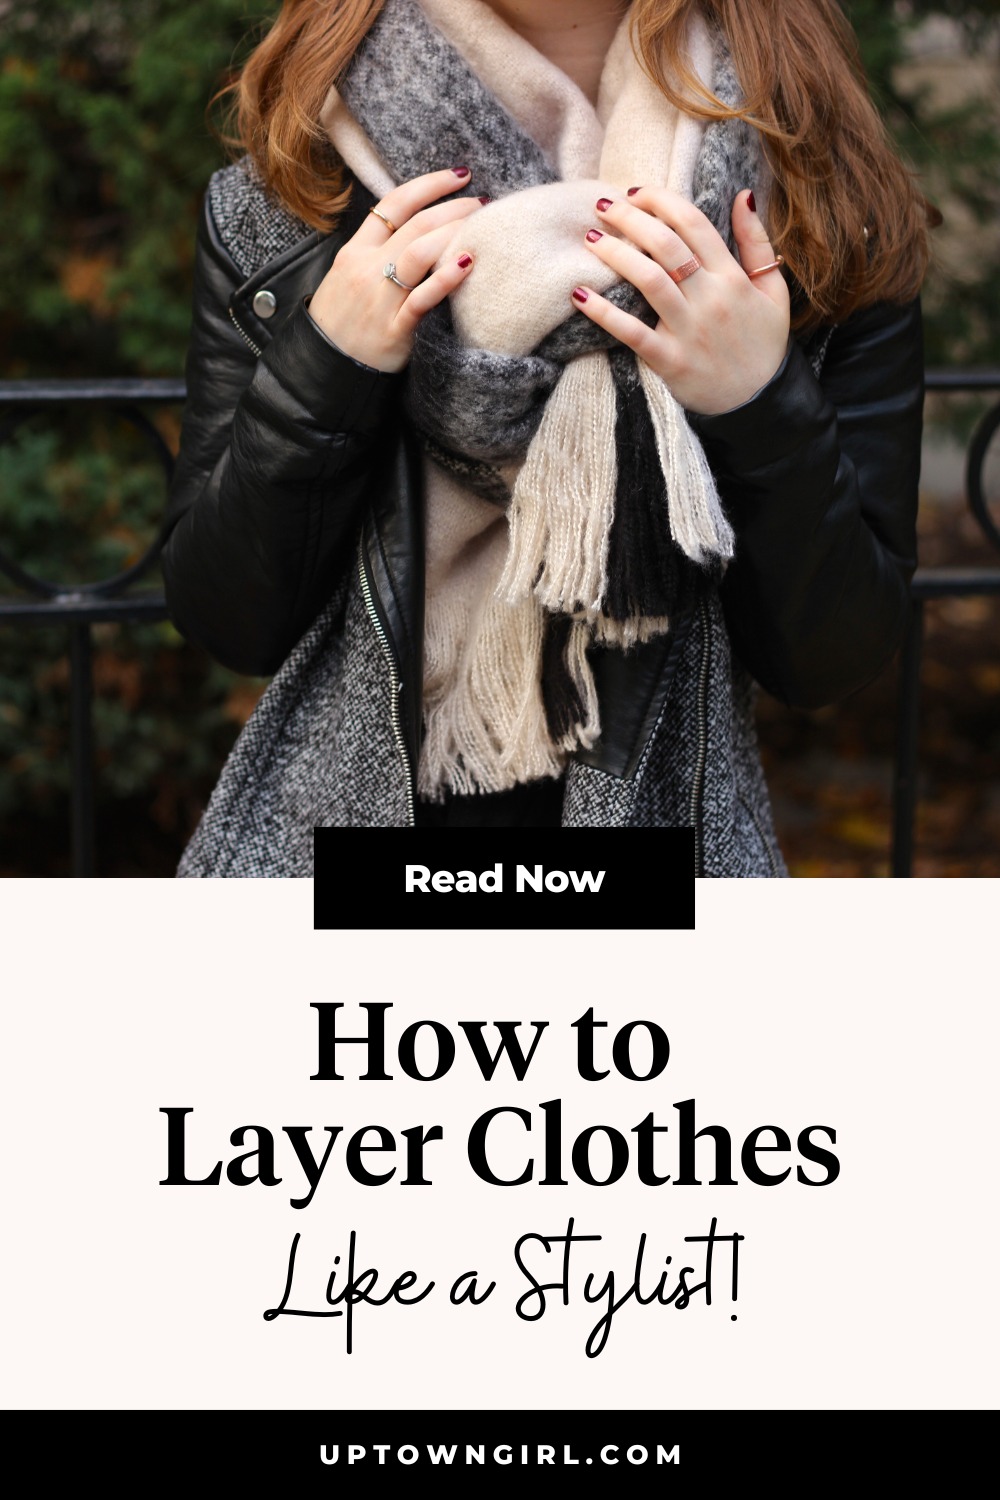 8 Genius Tips on How to Layer Clothes Like a Stylist - Uptown Girl